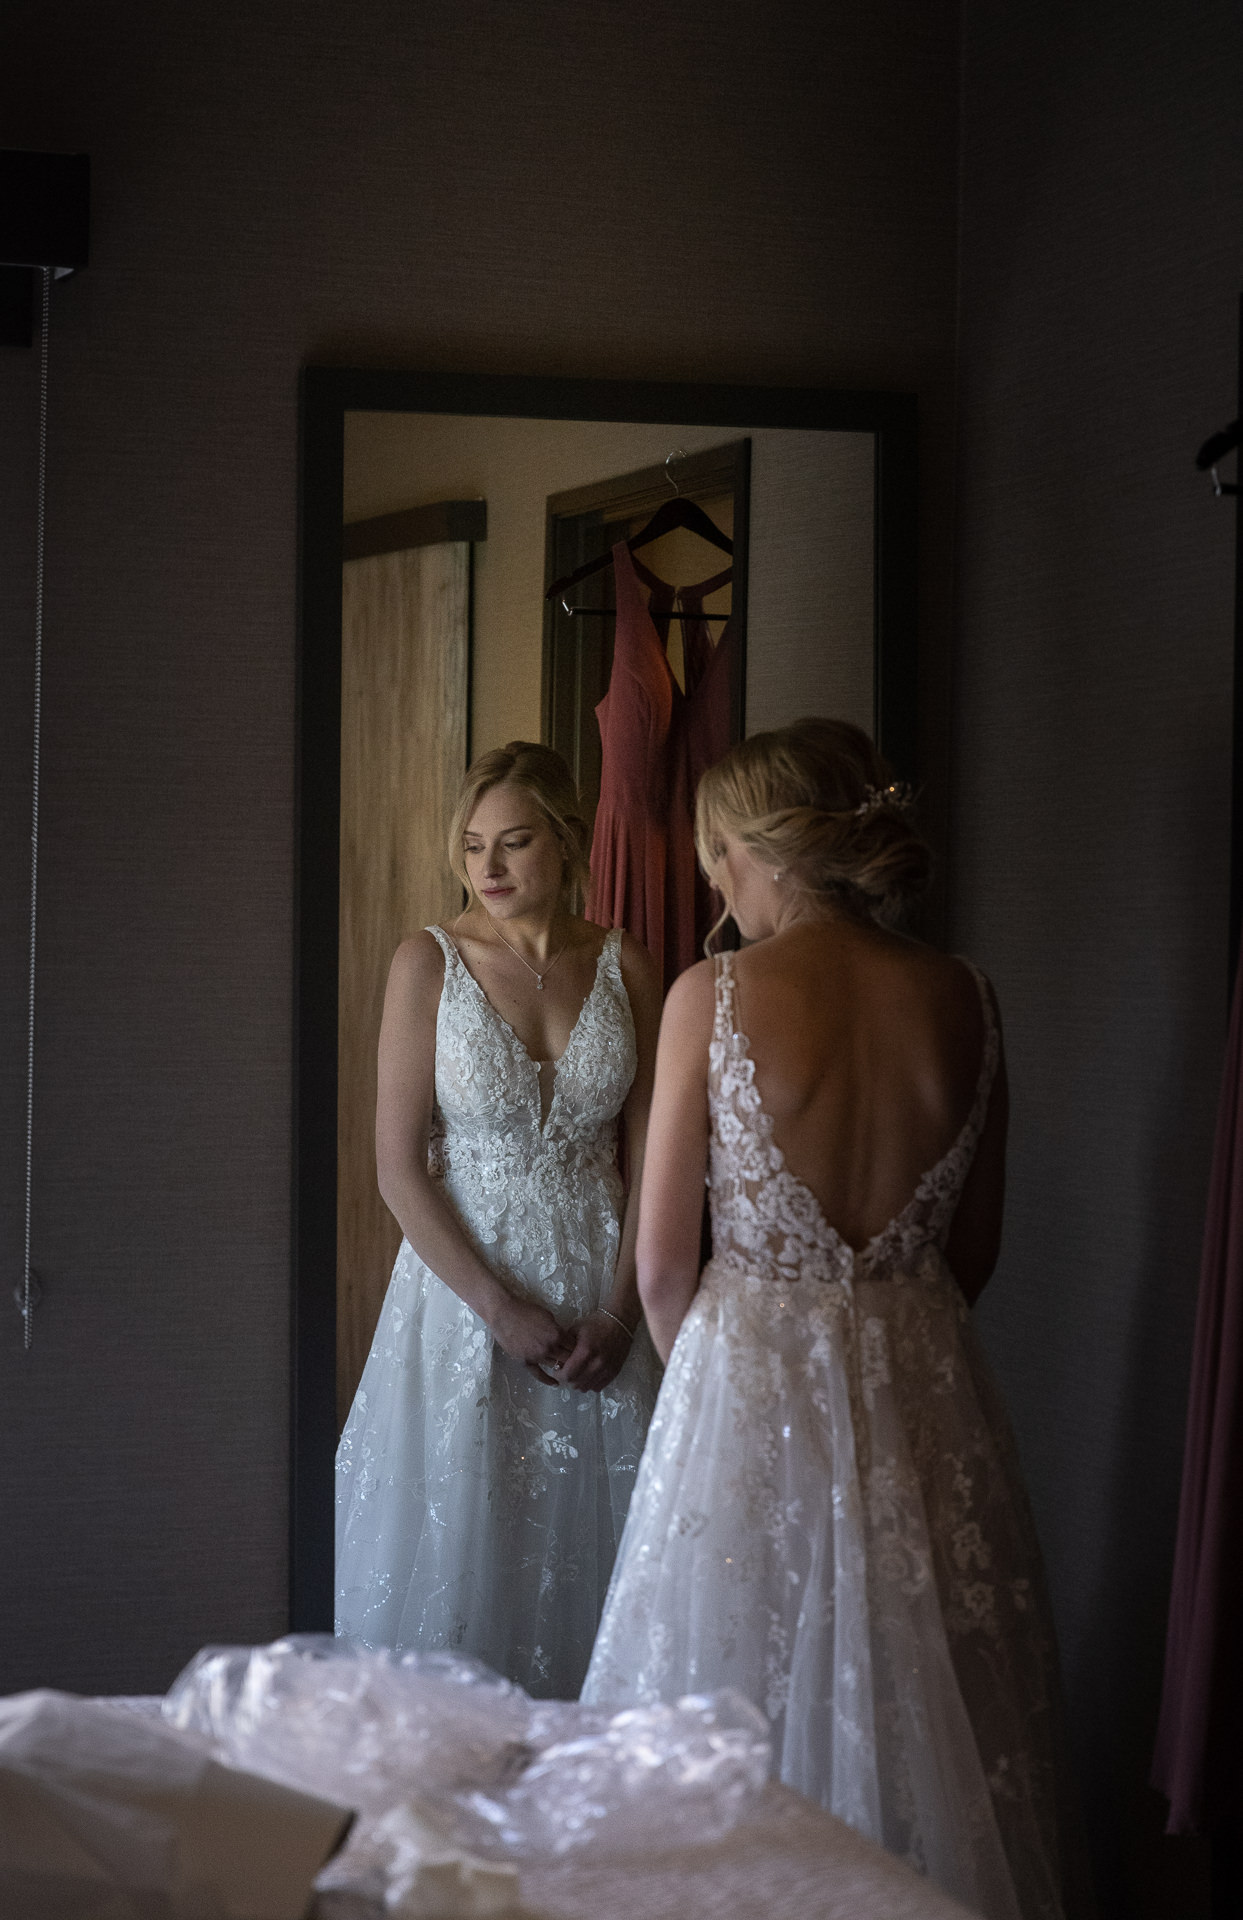 Bride Gets Ready in Hotel Room Before Wedding